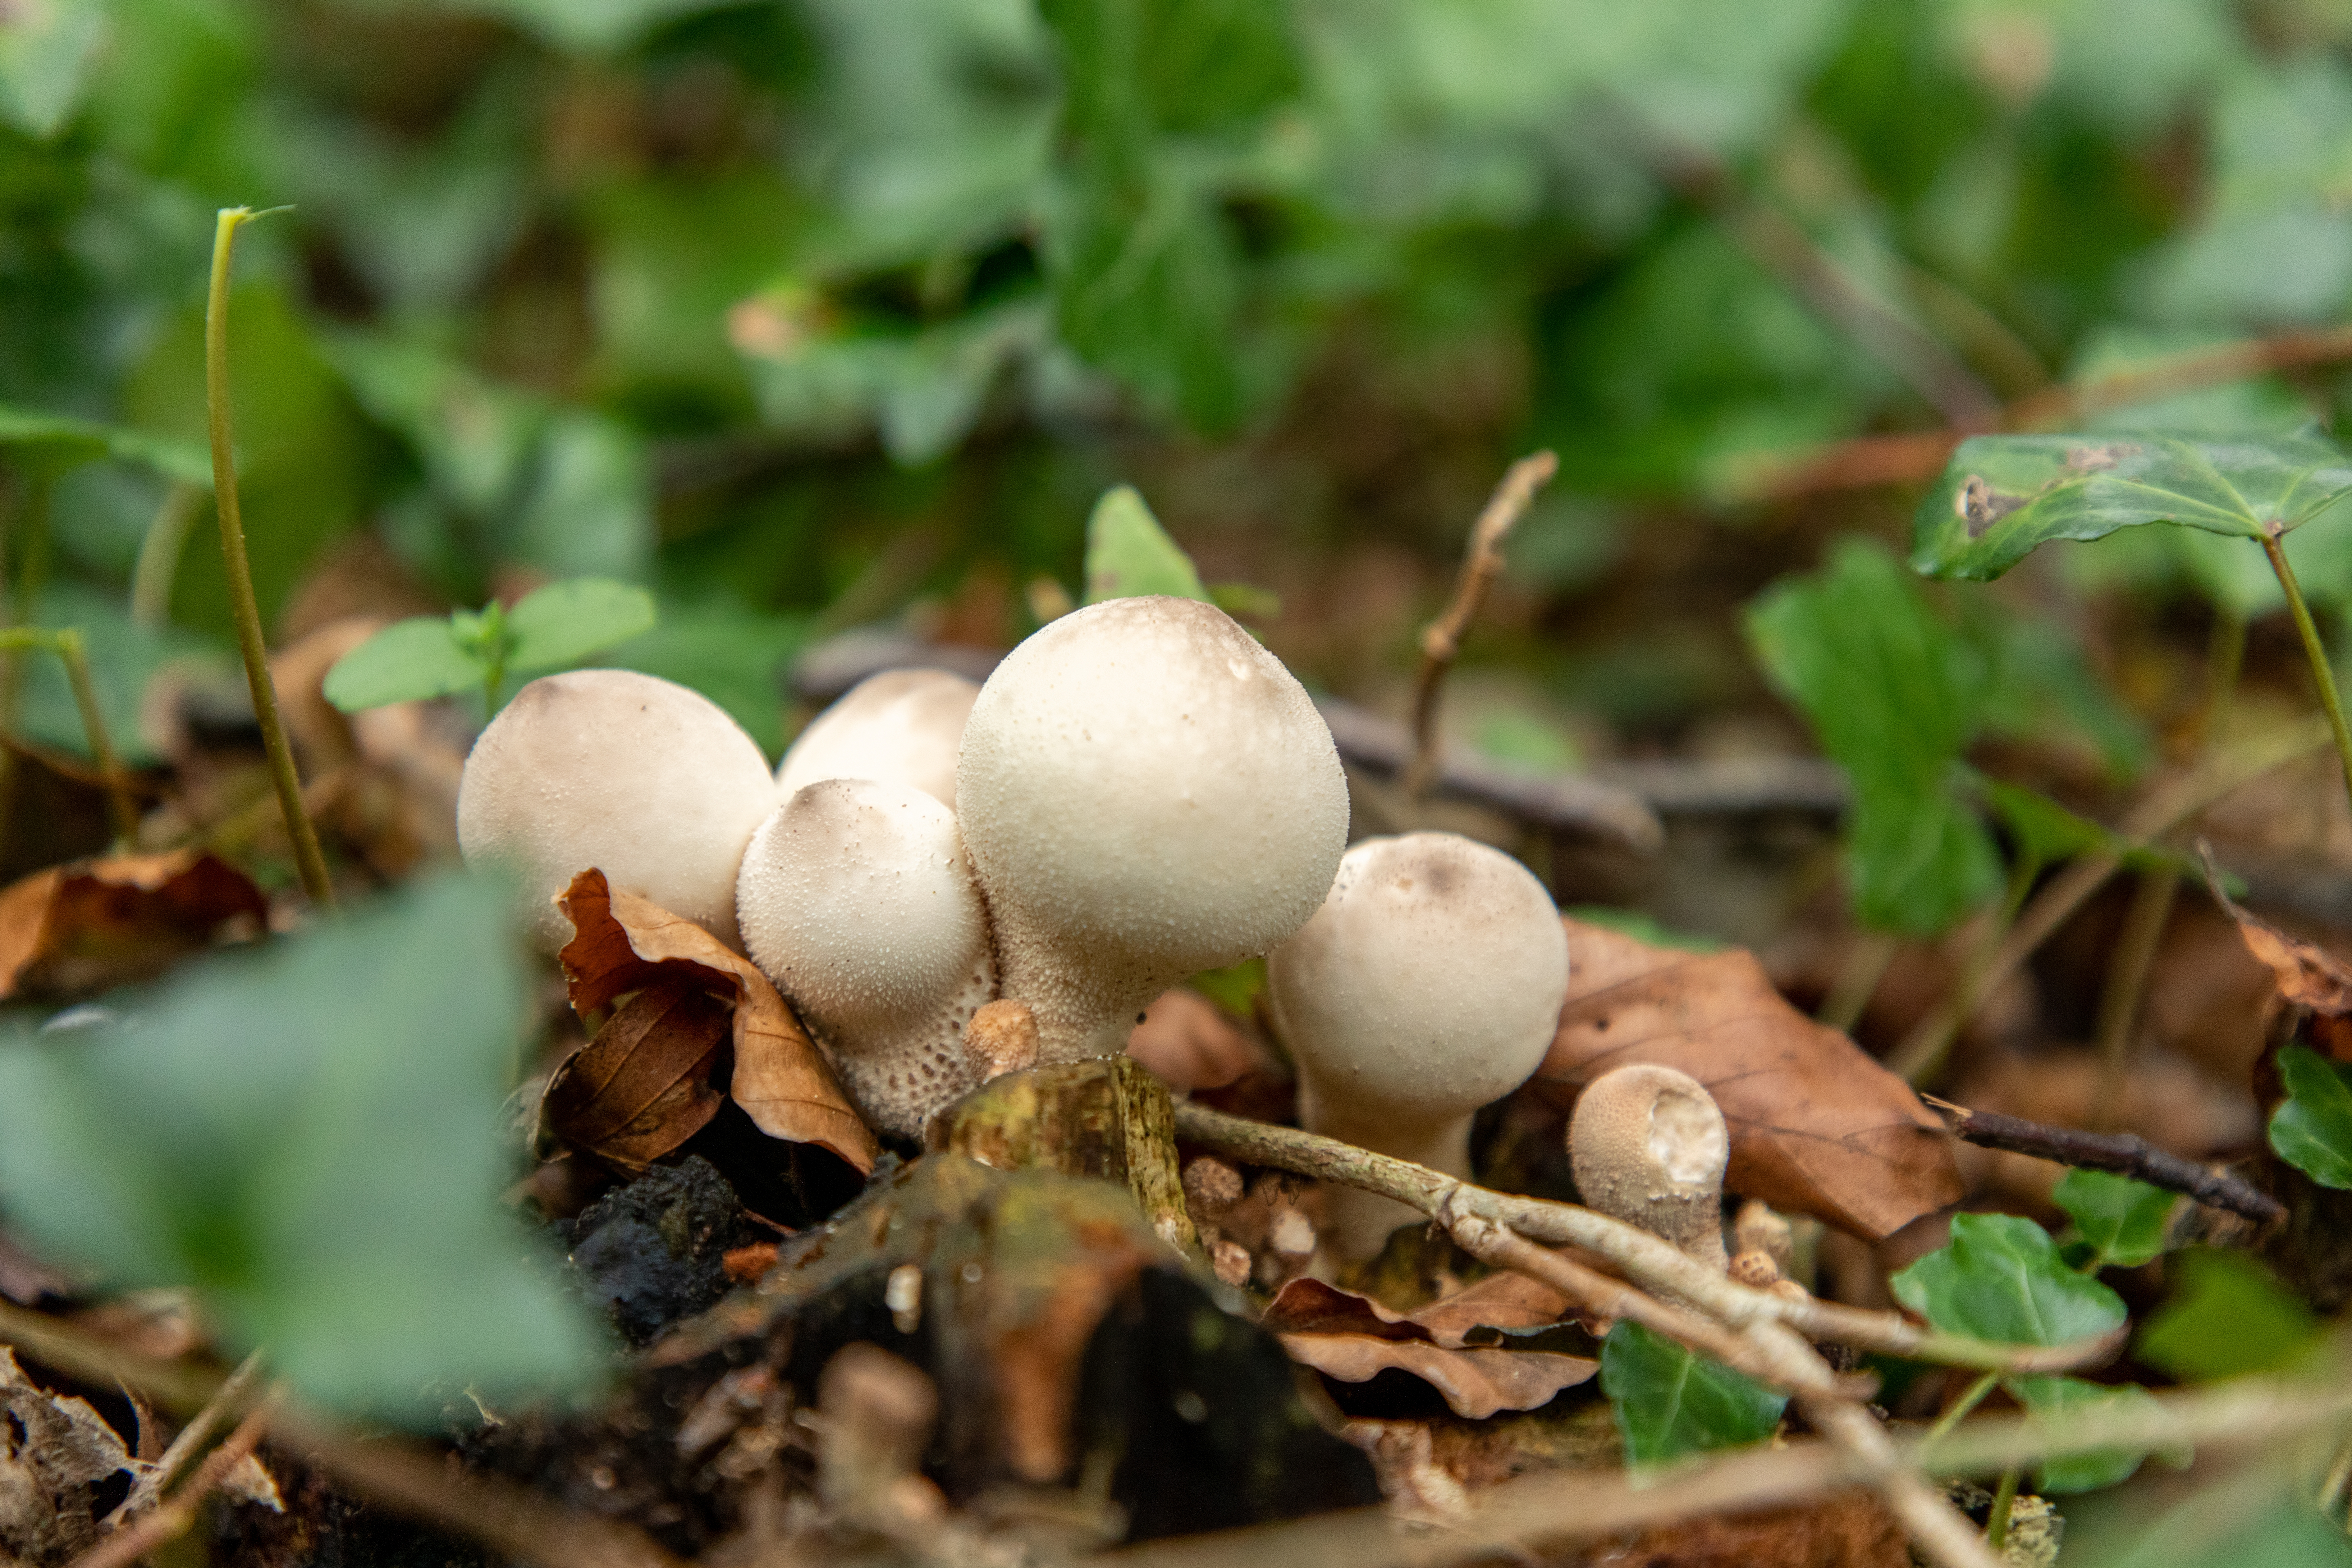 Close up of common puffballs